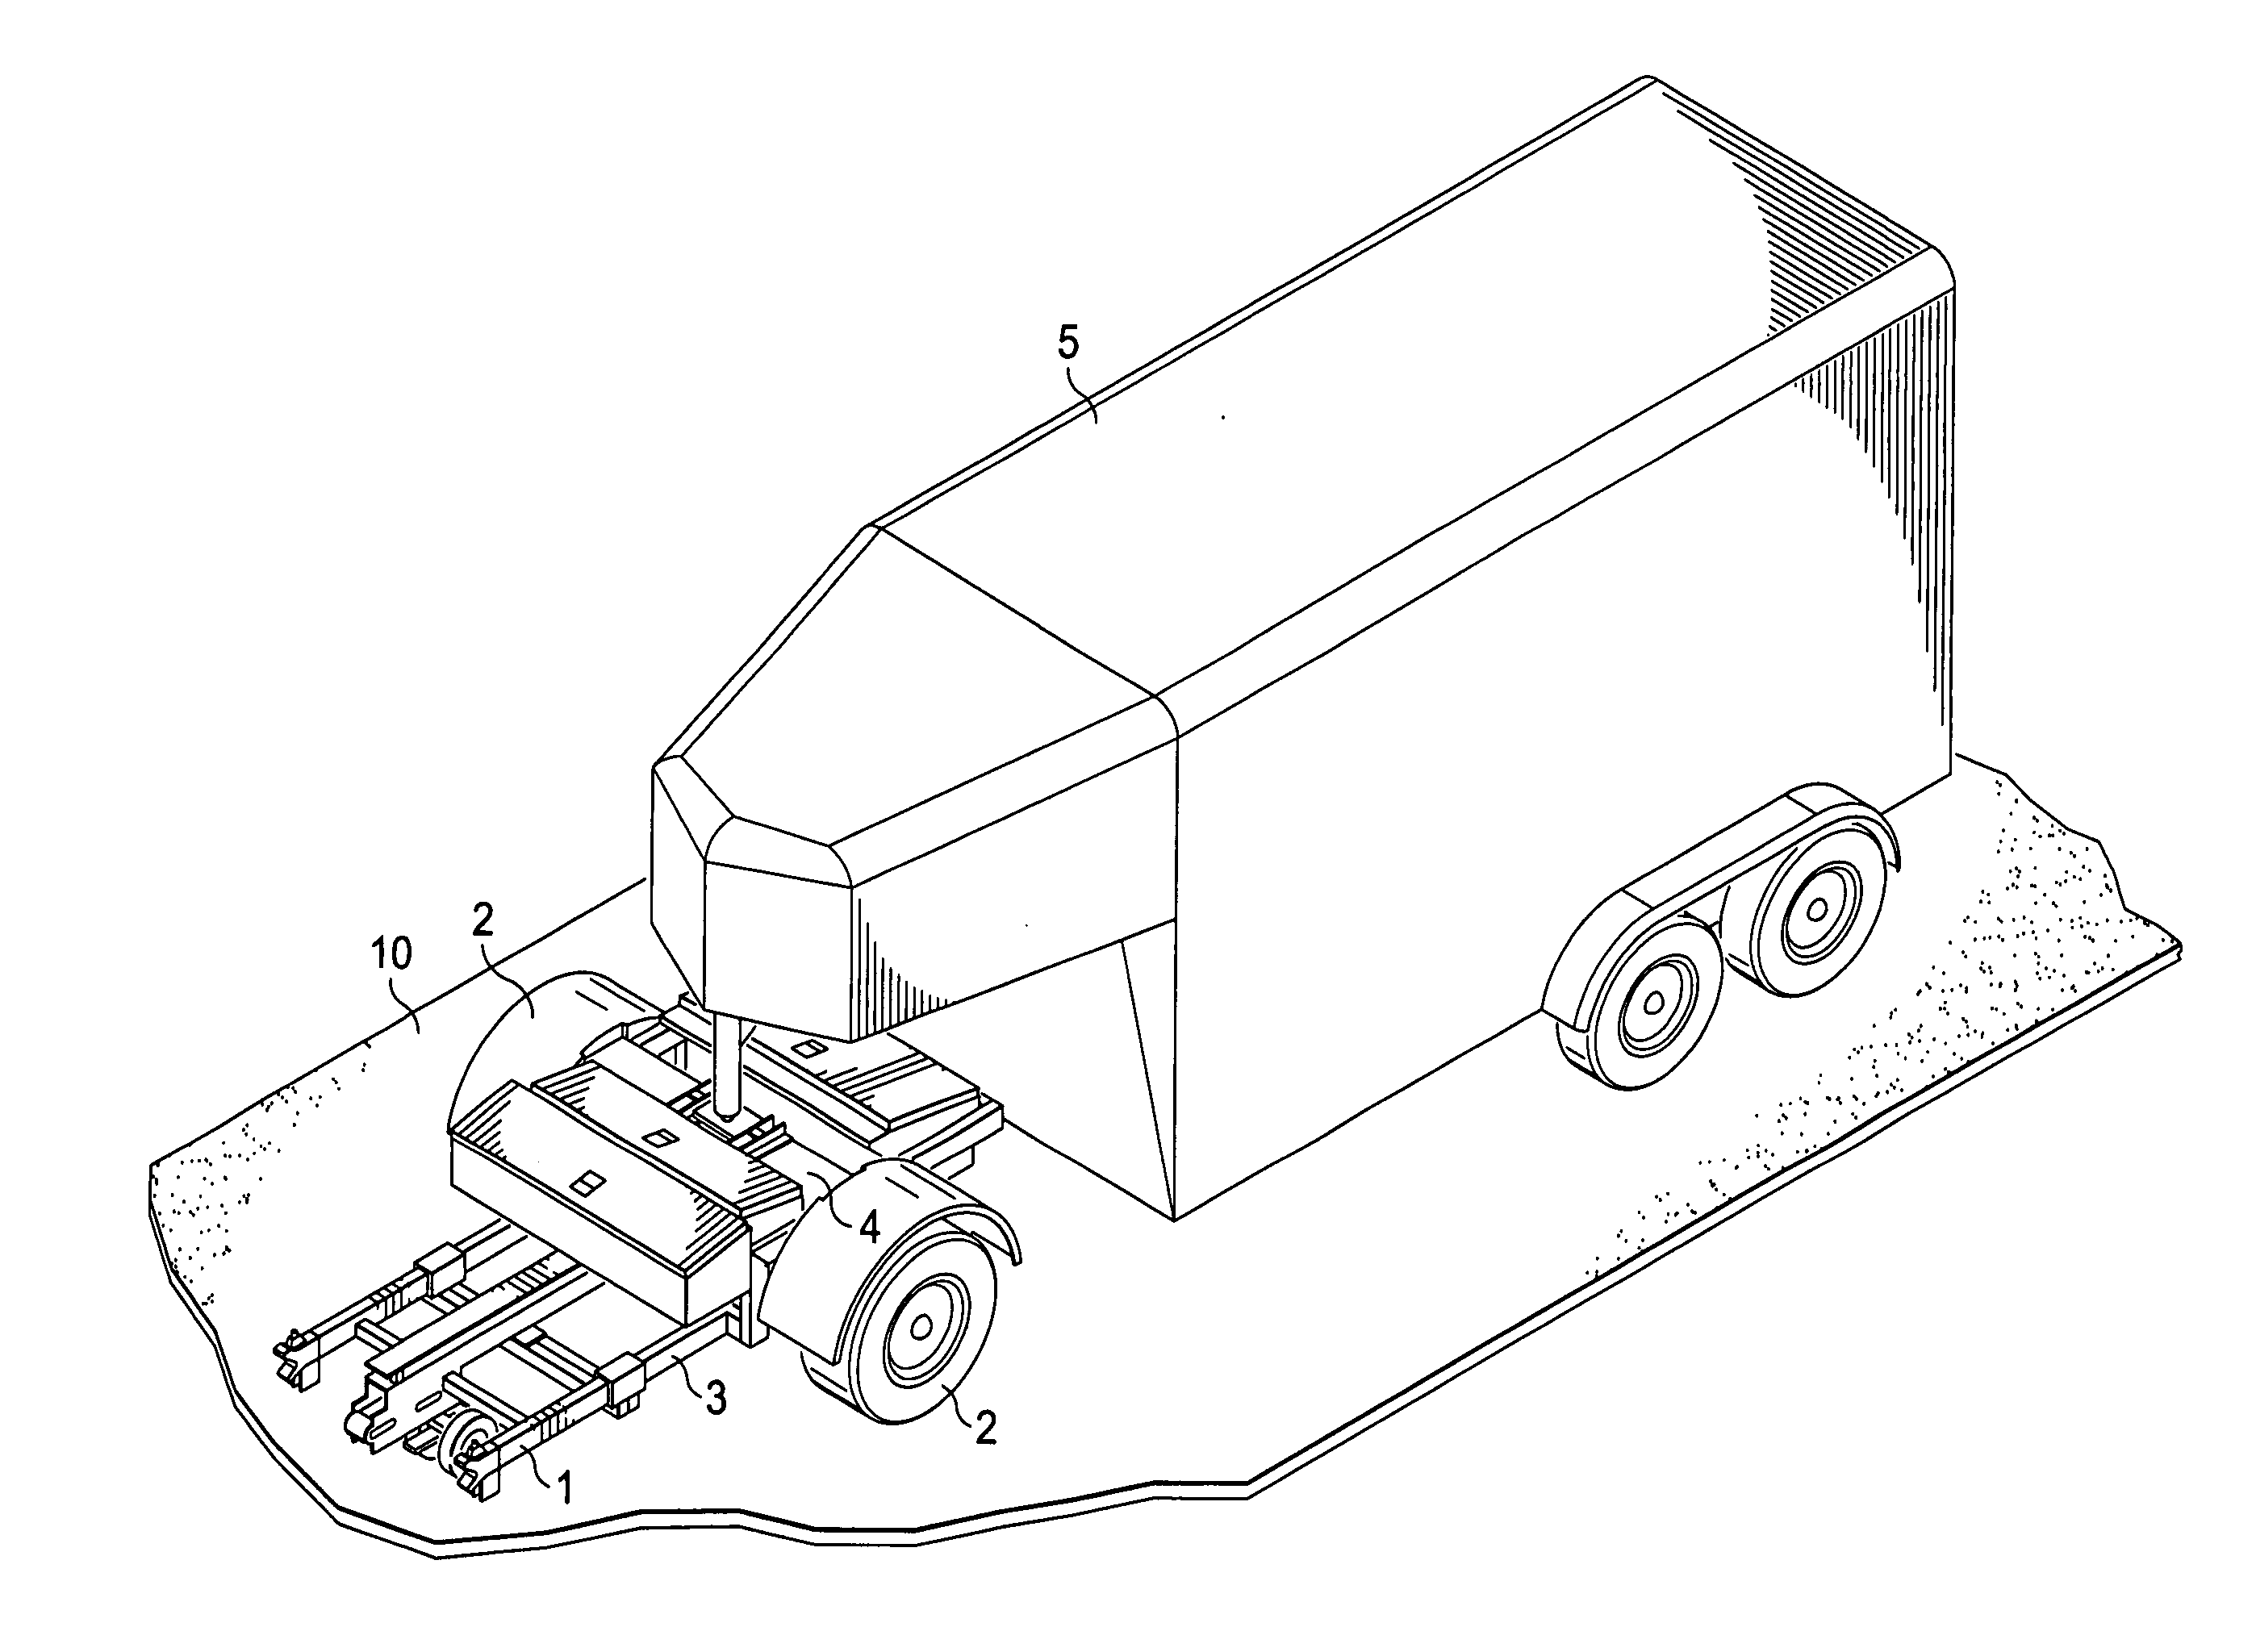 Automated axle steering control system